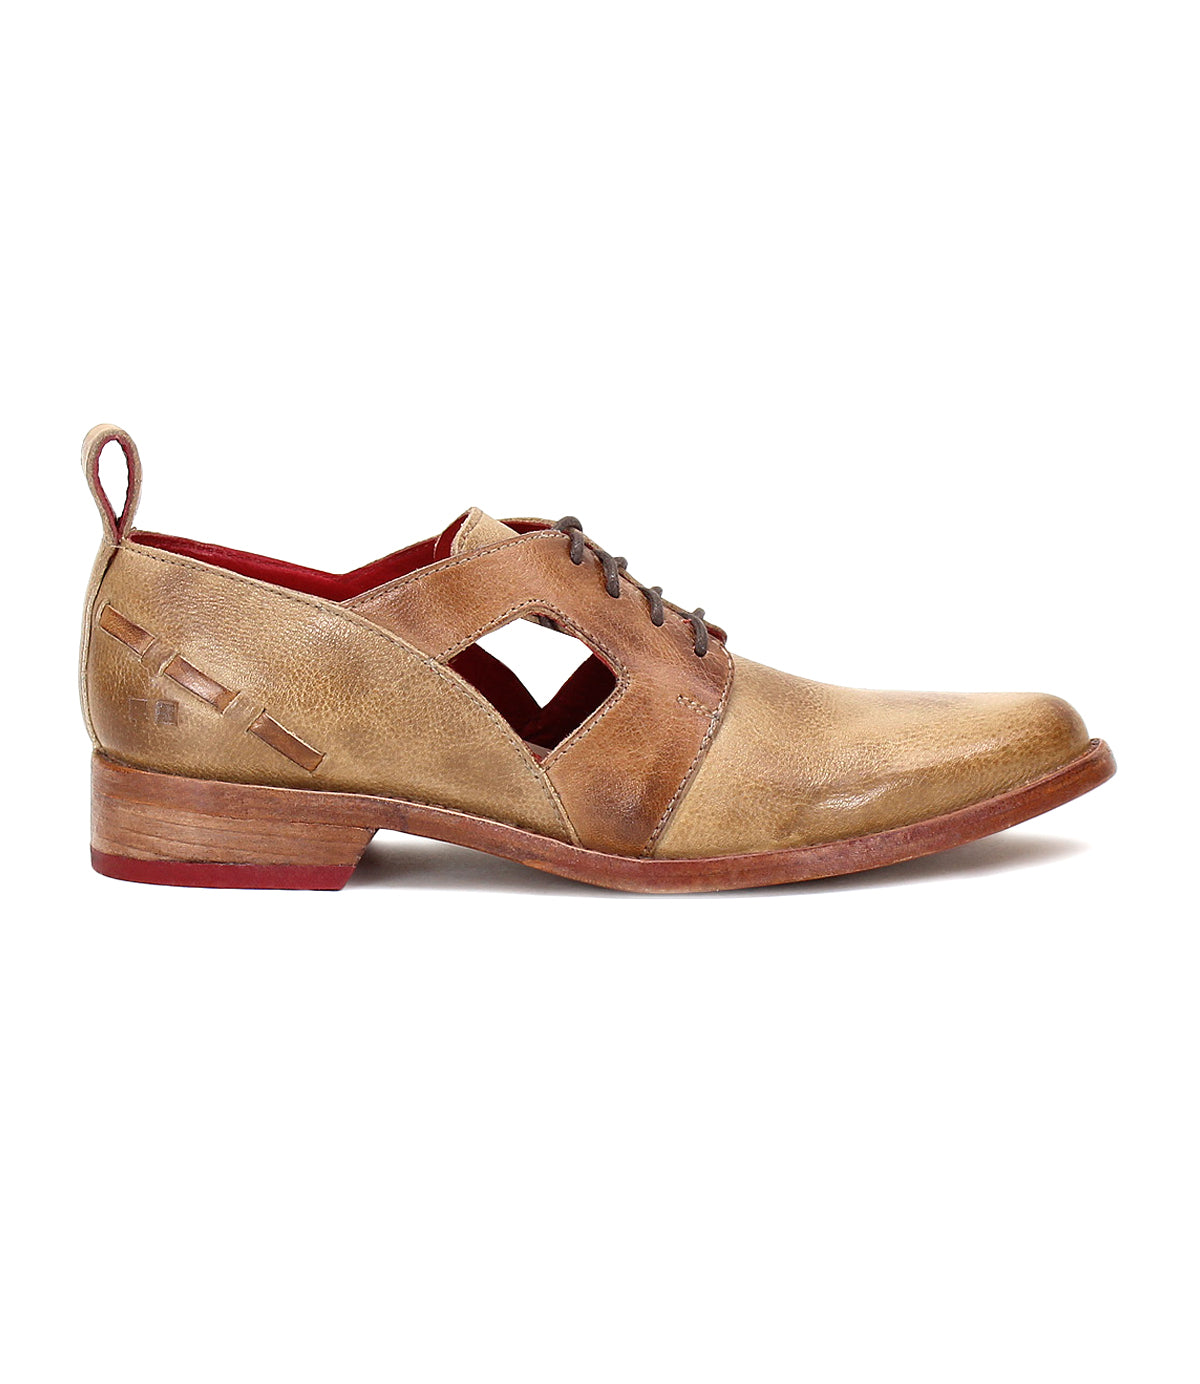 Brown leather cut-out Neftis oxford shoe with a pointed toe on a white background by Bed Stu.